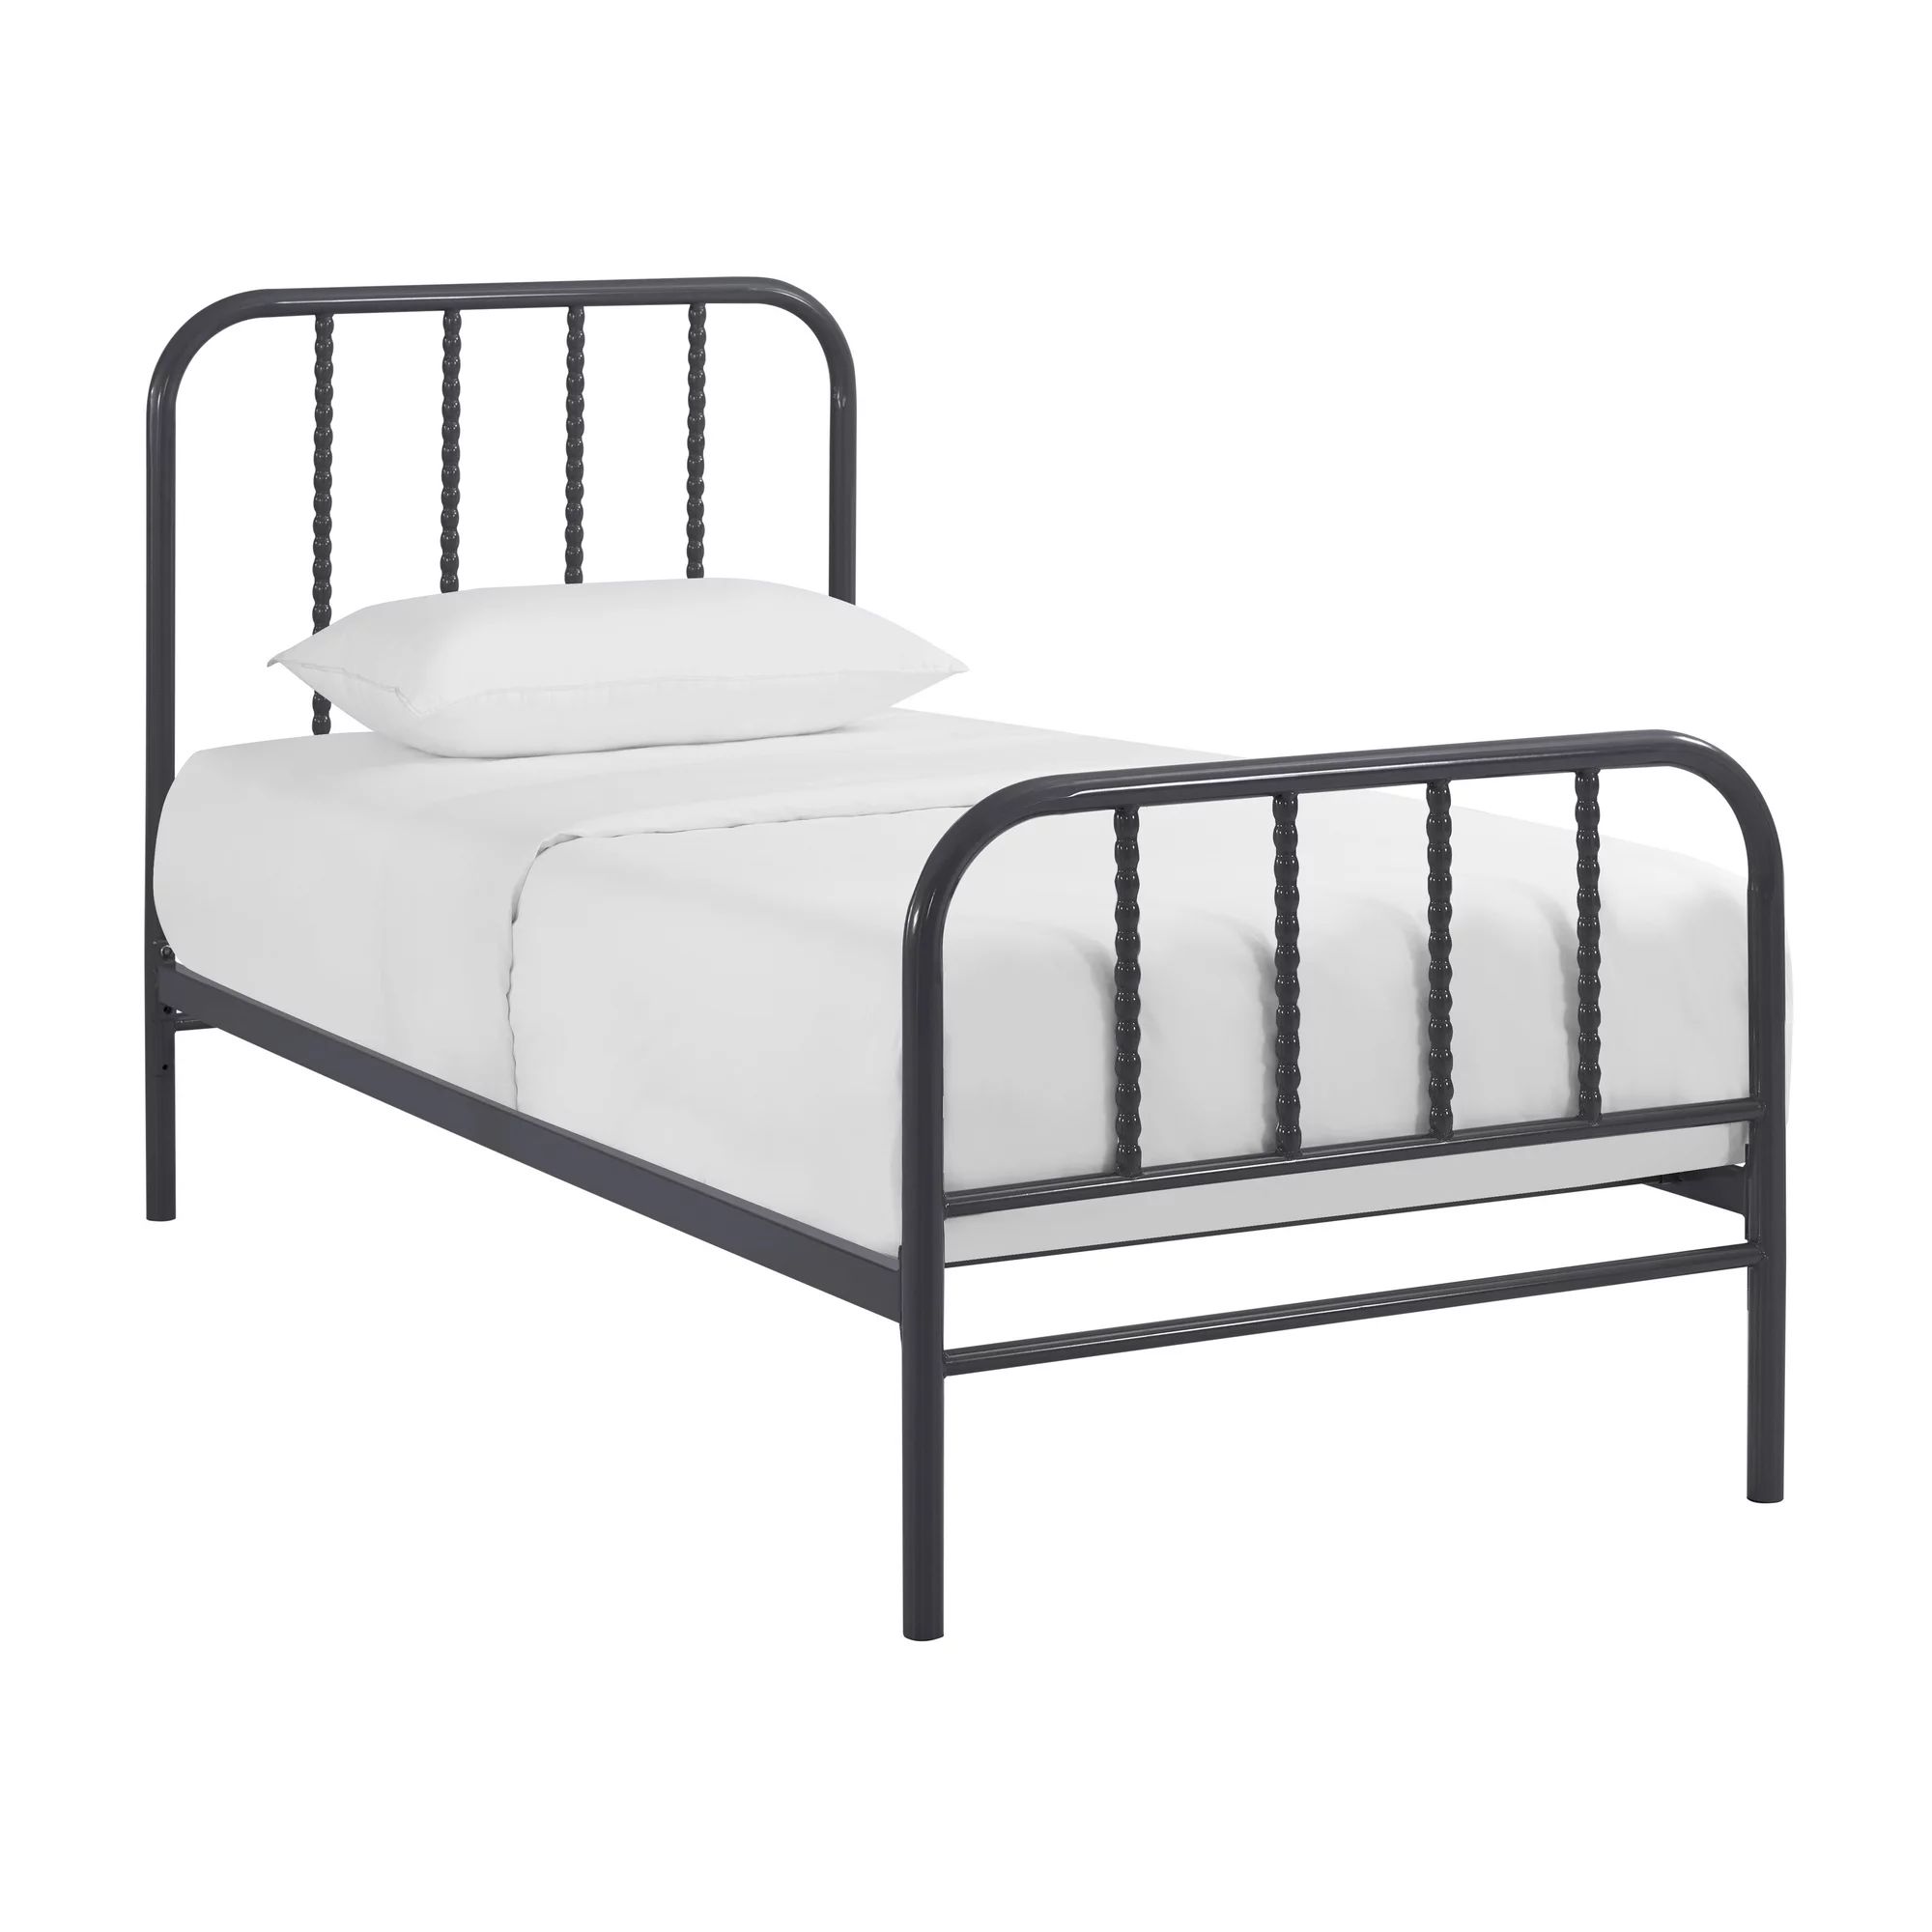 DHI Joanna Industrial Metal Platform Bed, Multiple Sizes and Colors | Walmart (US)